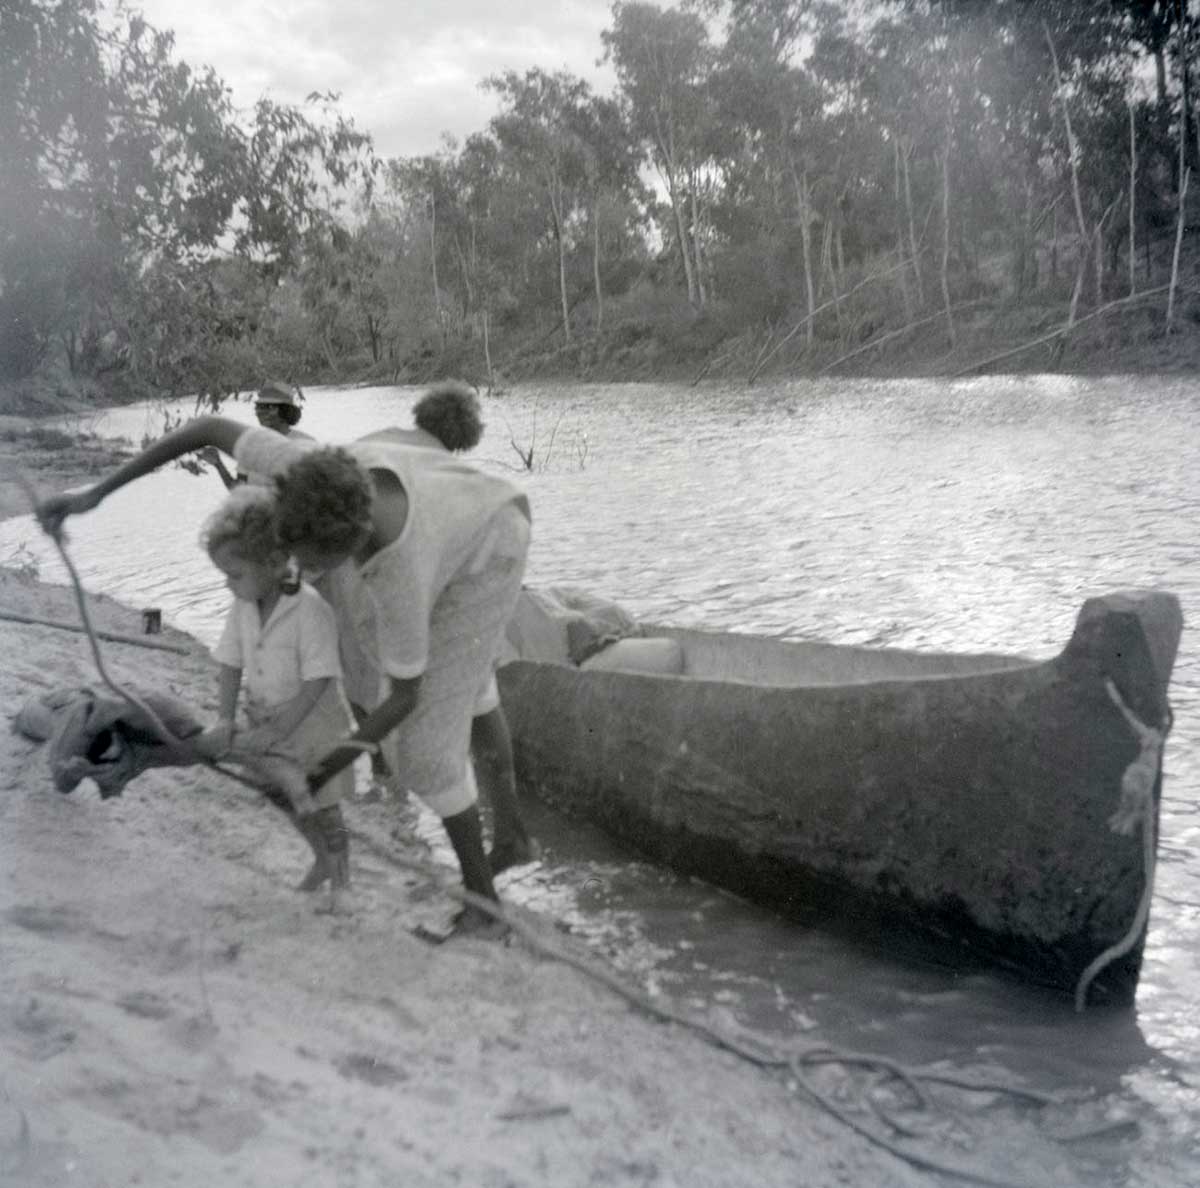 A black and white photographic negative that depicts an Aboriginal child and three adults standing on the edge of a riverbank next to a canoe. - click to view larger image